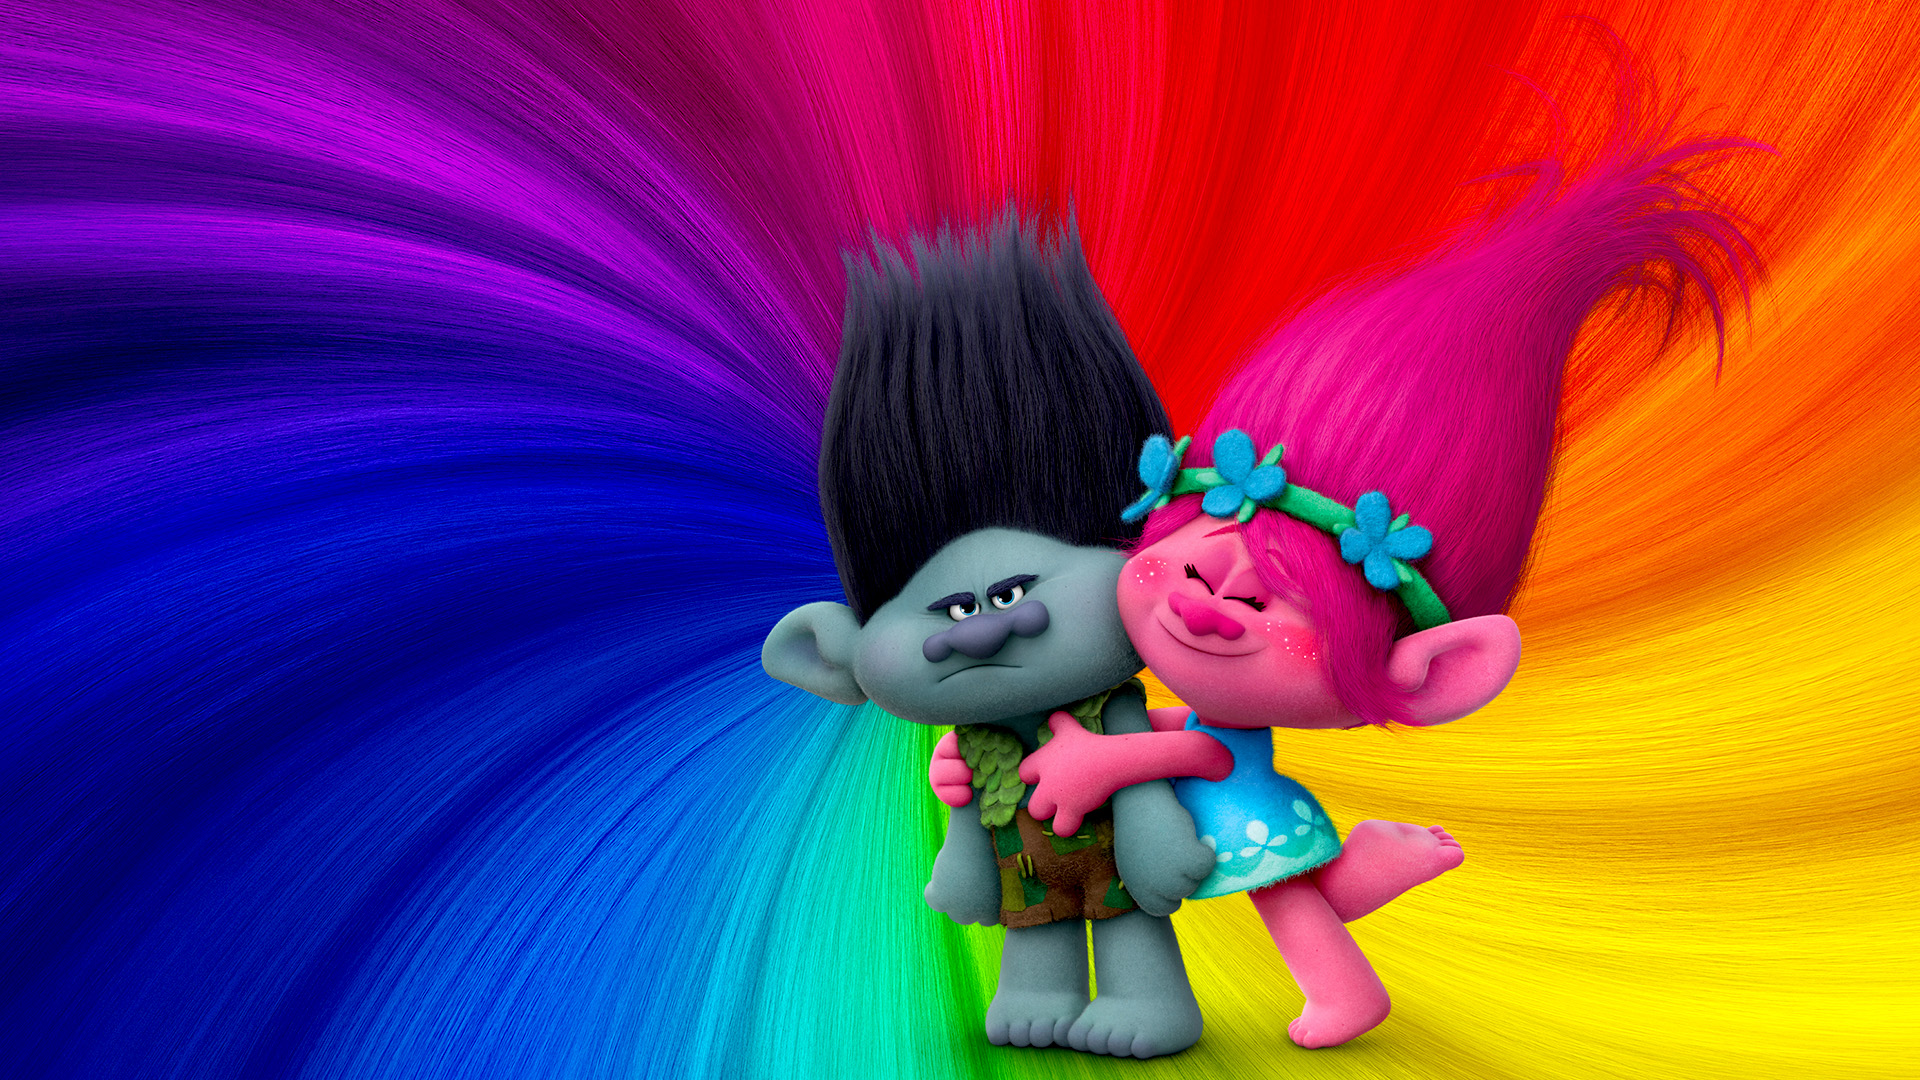 Download Trolls Wallpaper by Chucho76  bd  Free on ZEDGE now Browse  millions of popular trol  Poppy and branch Wallpaper iphone disney Cute  disney wallpaper